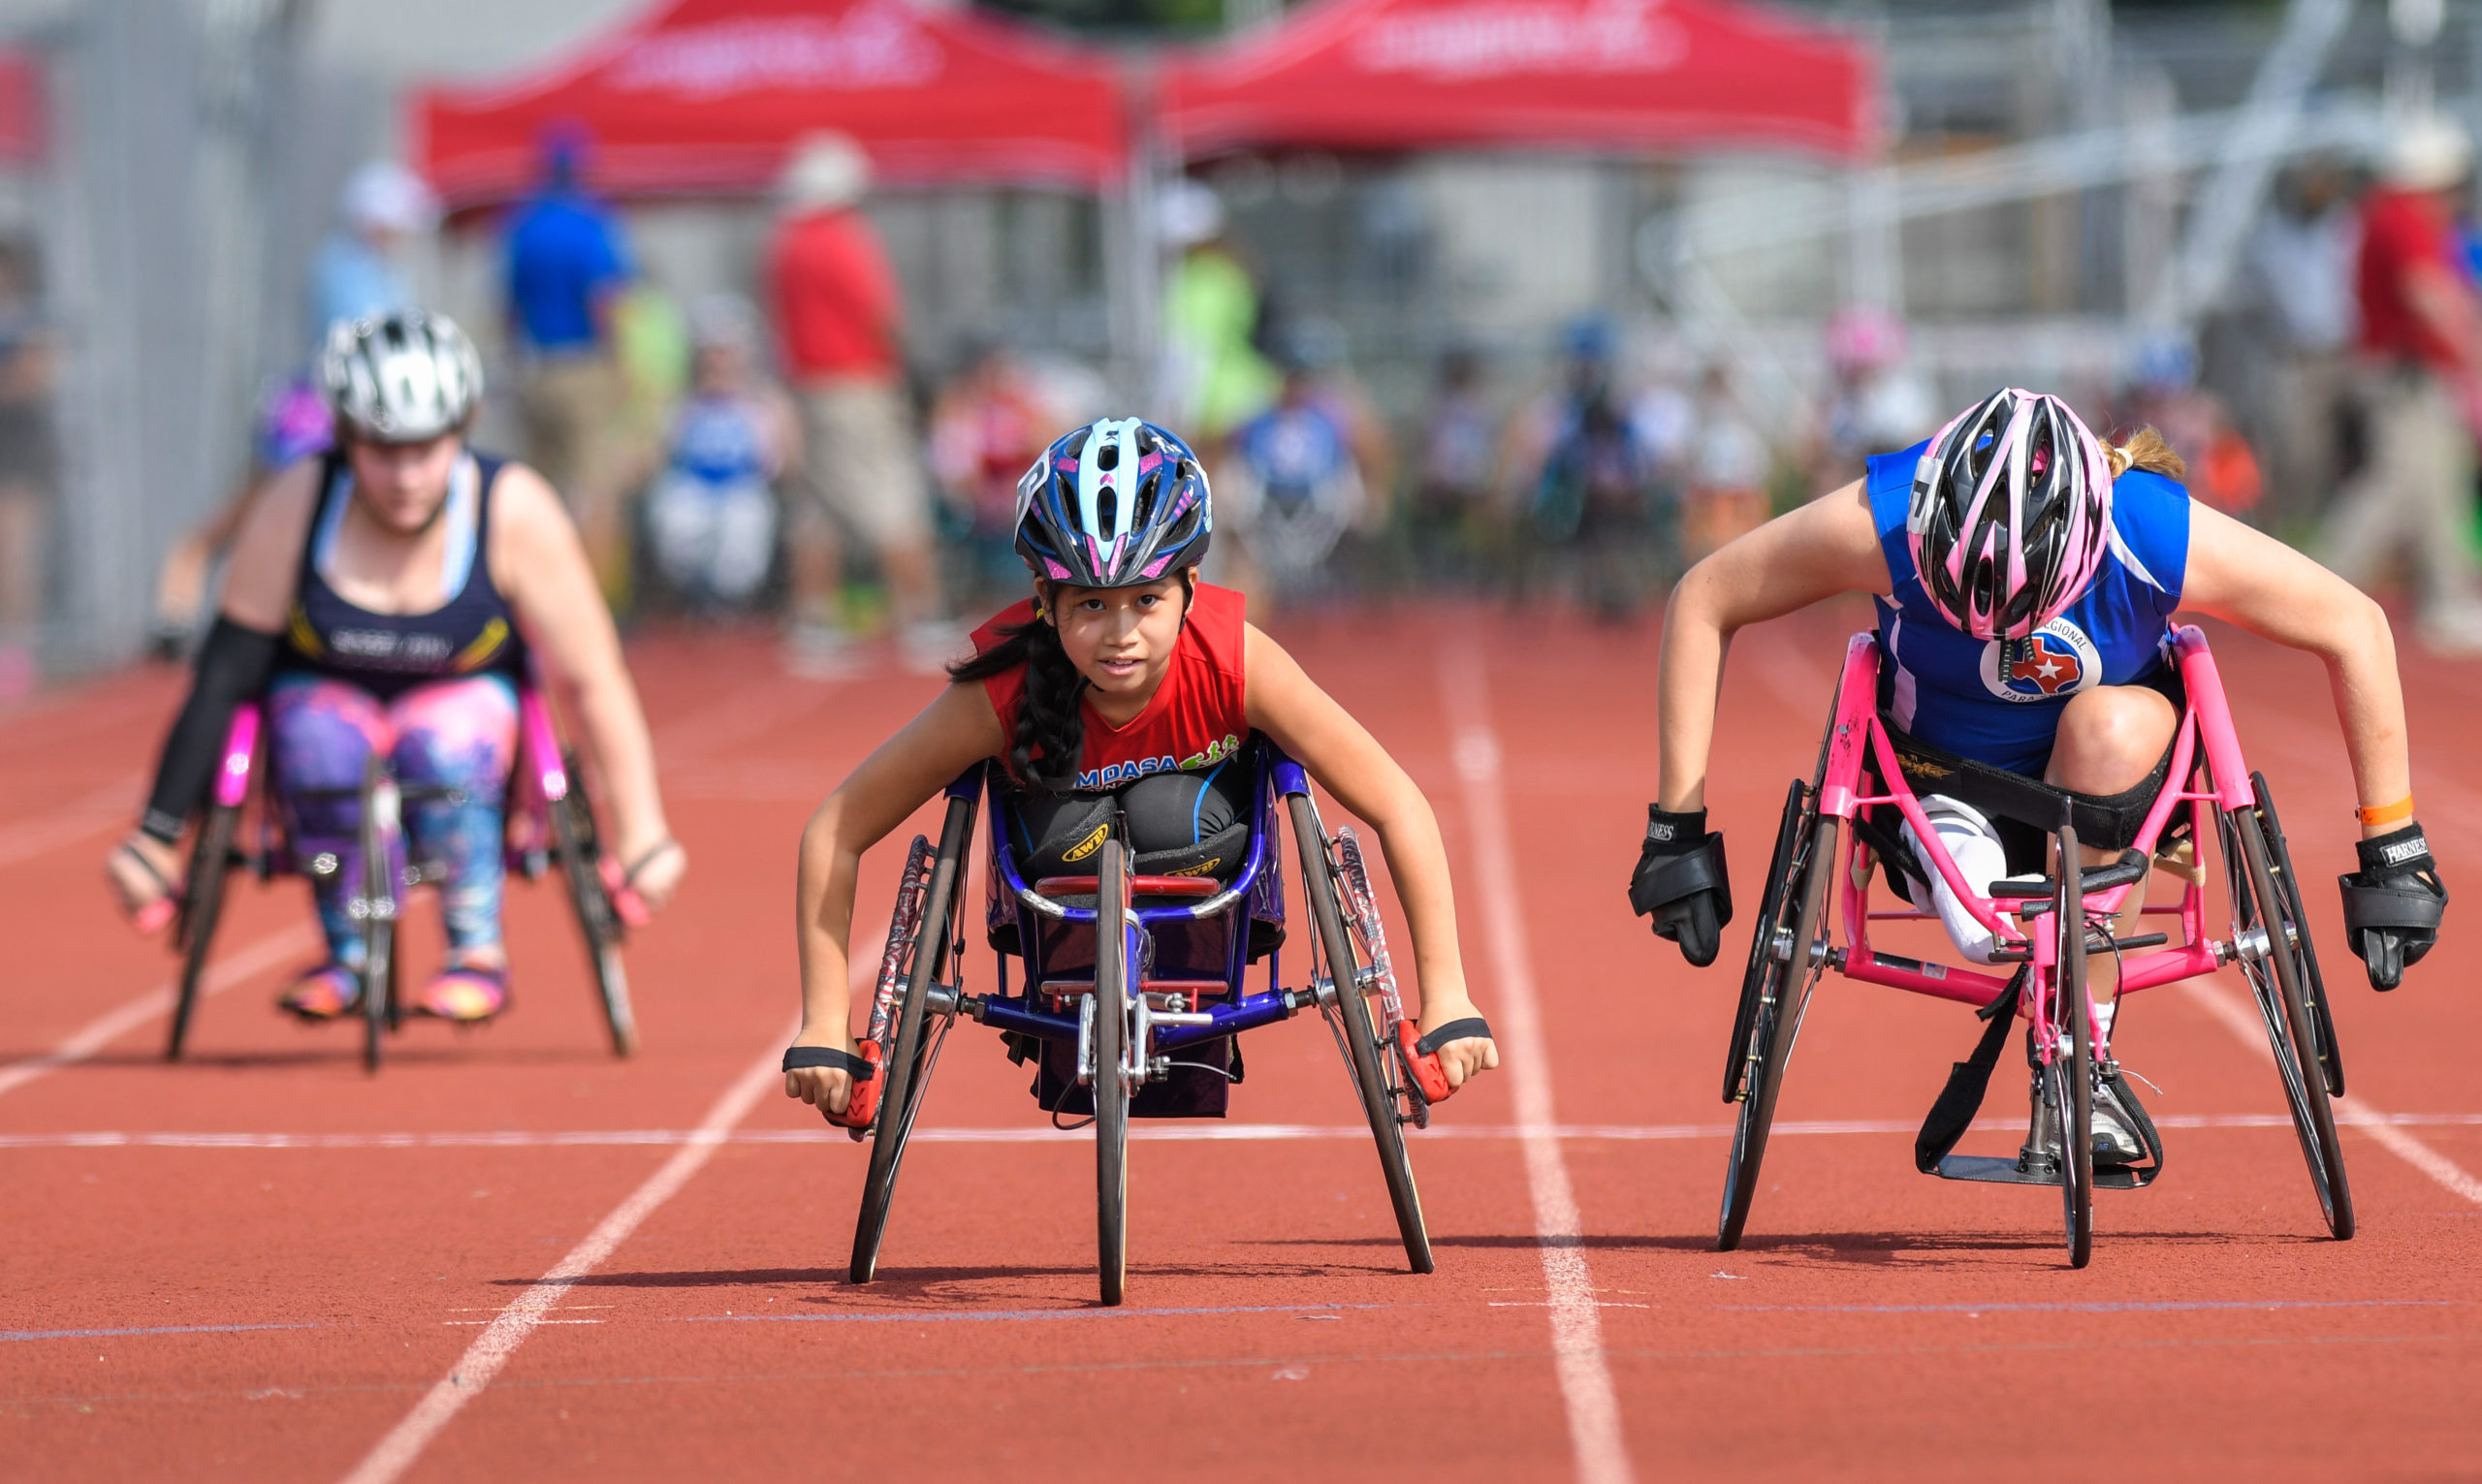 Three athletes competing in wheelchair racing